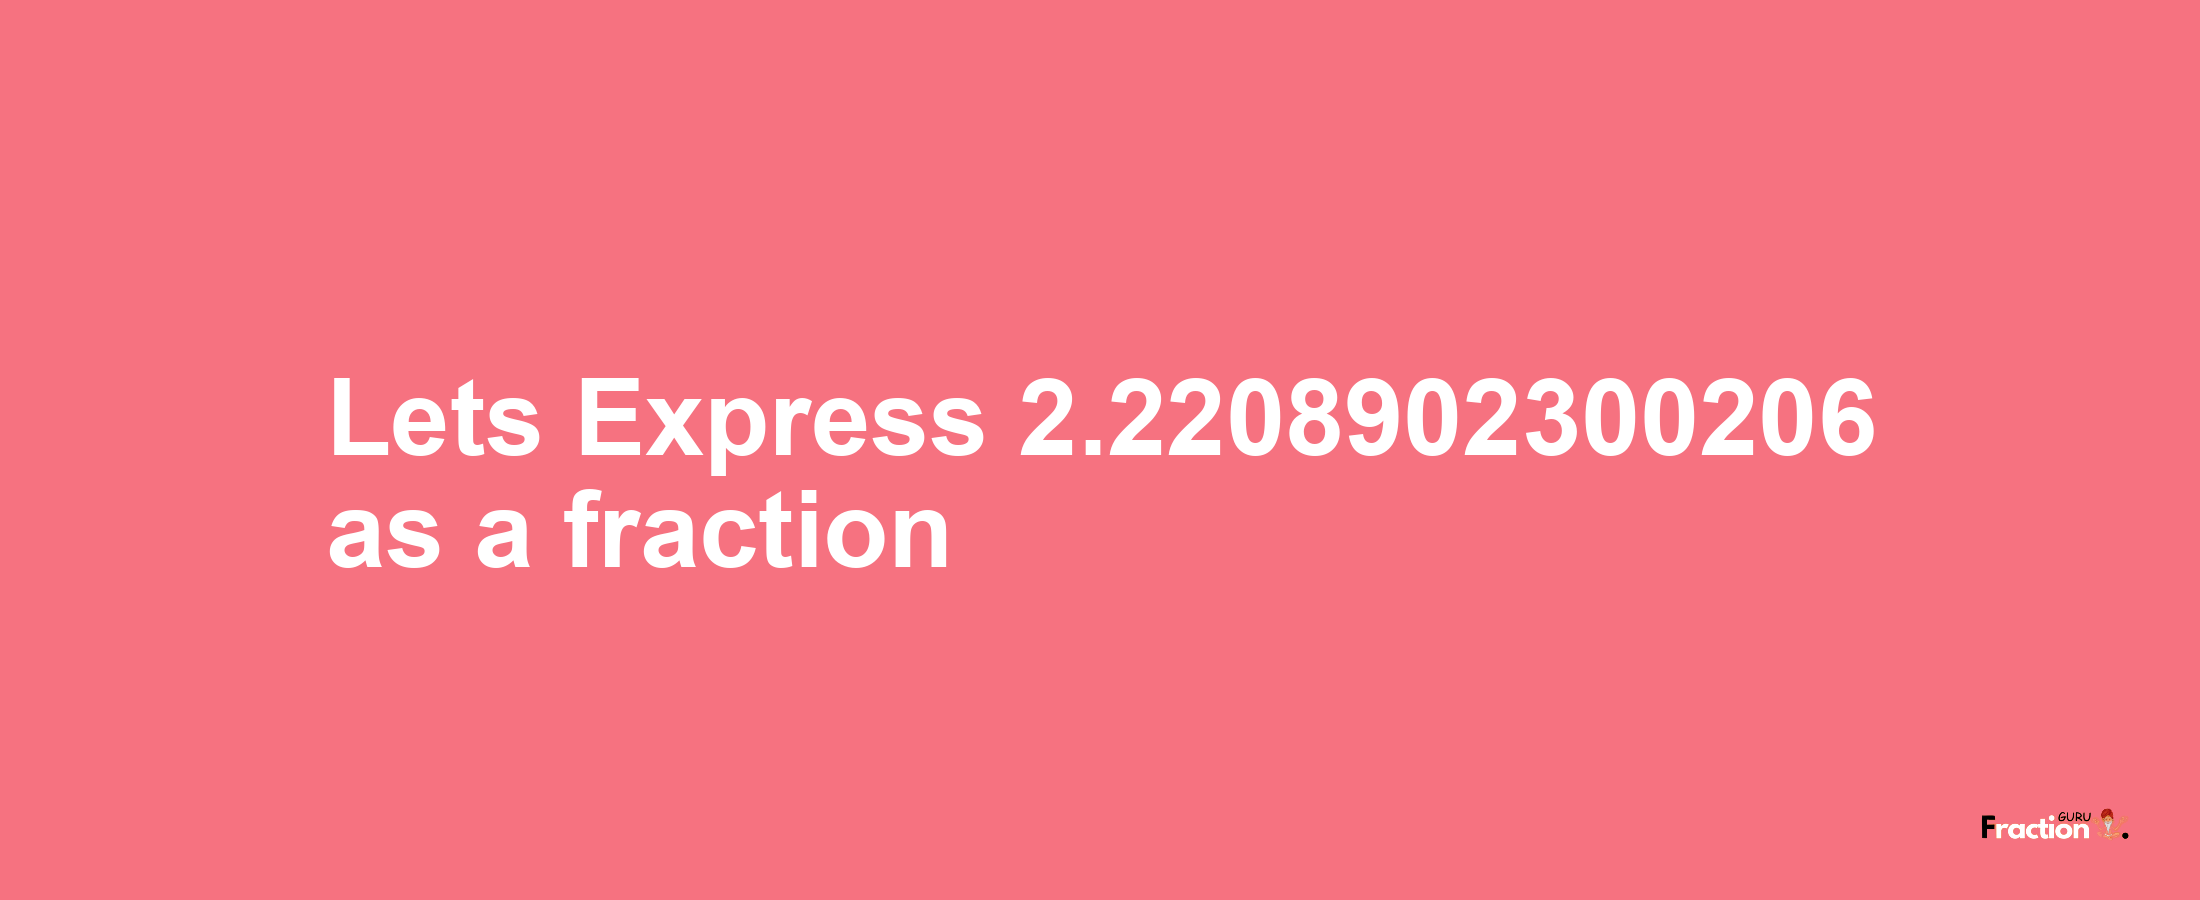 Lets Express 2.2208902300206 as afraction